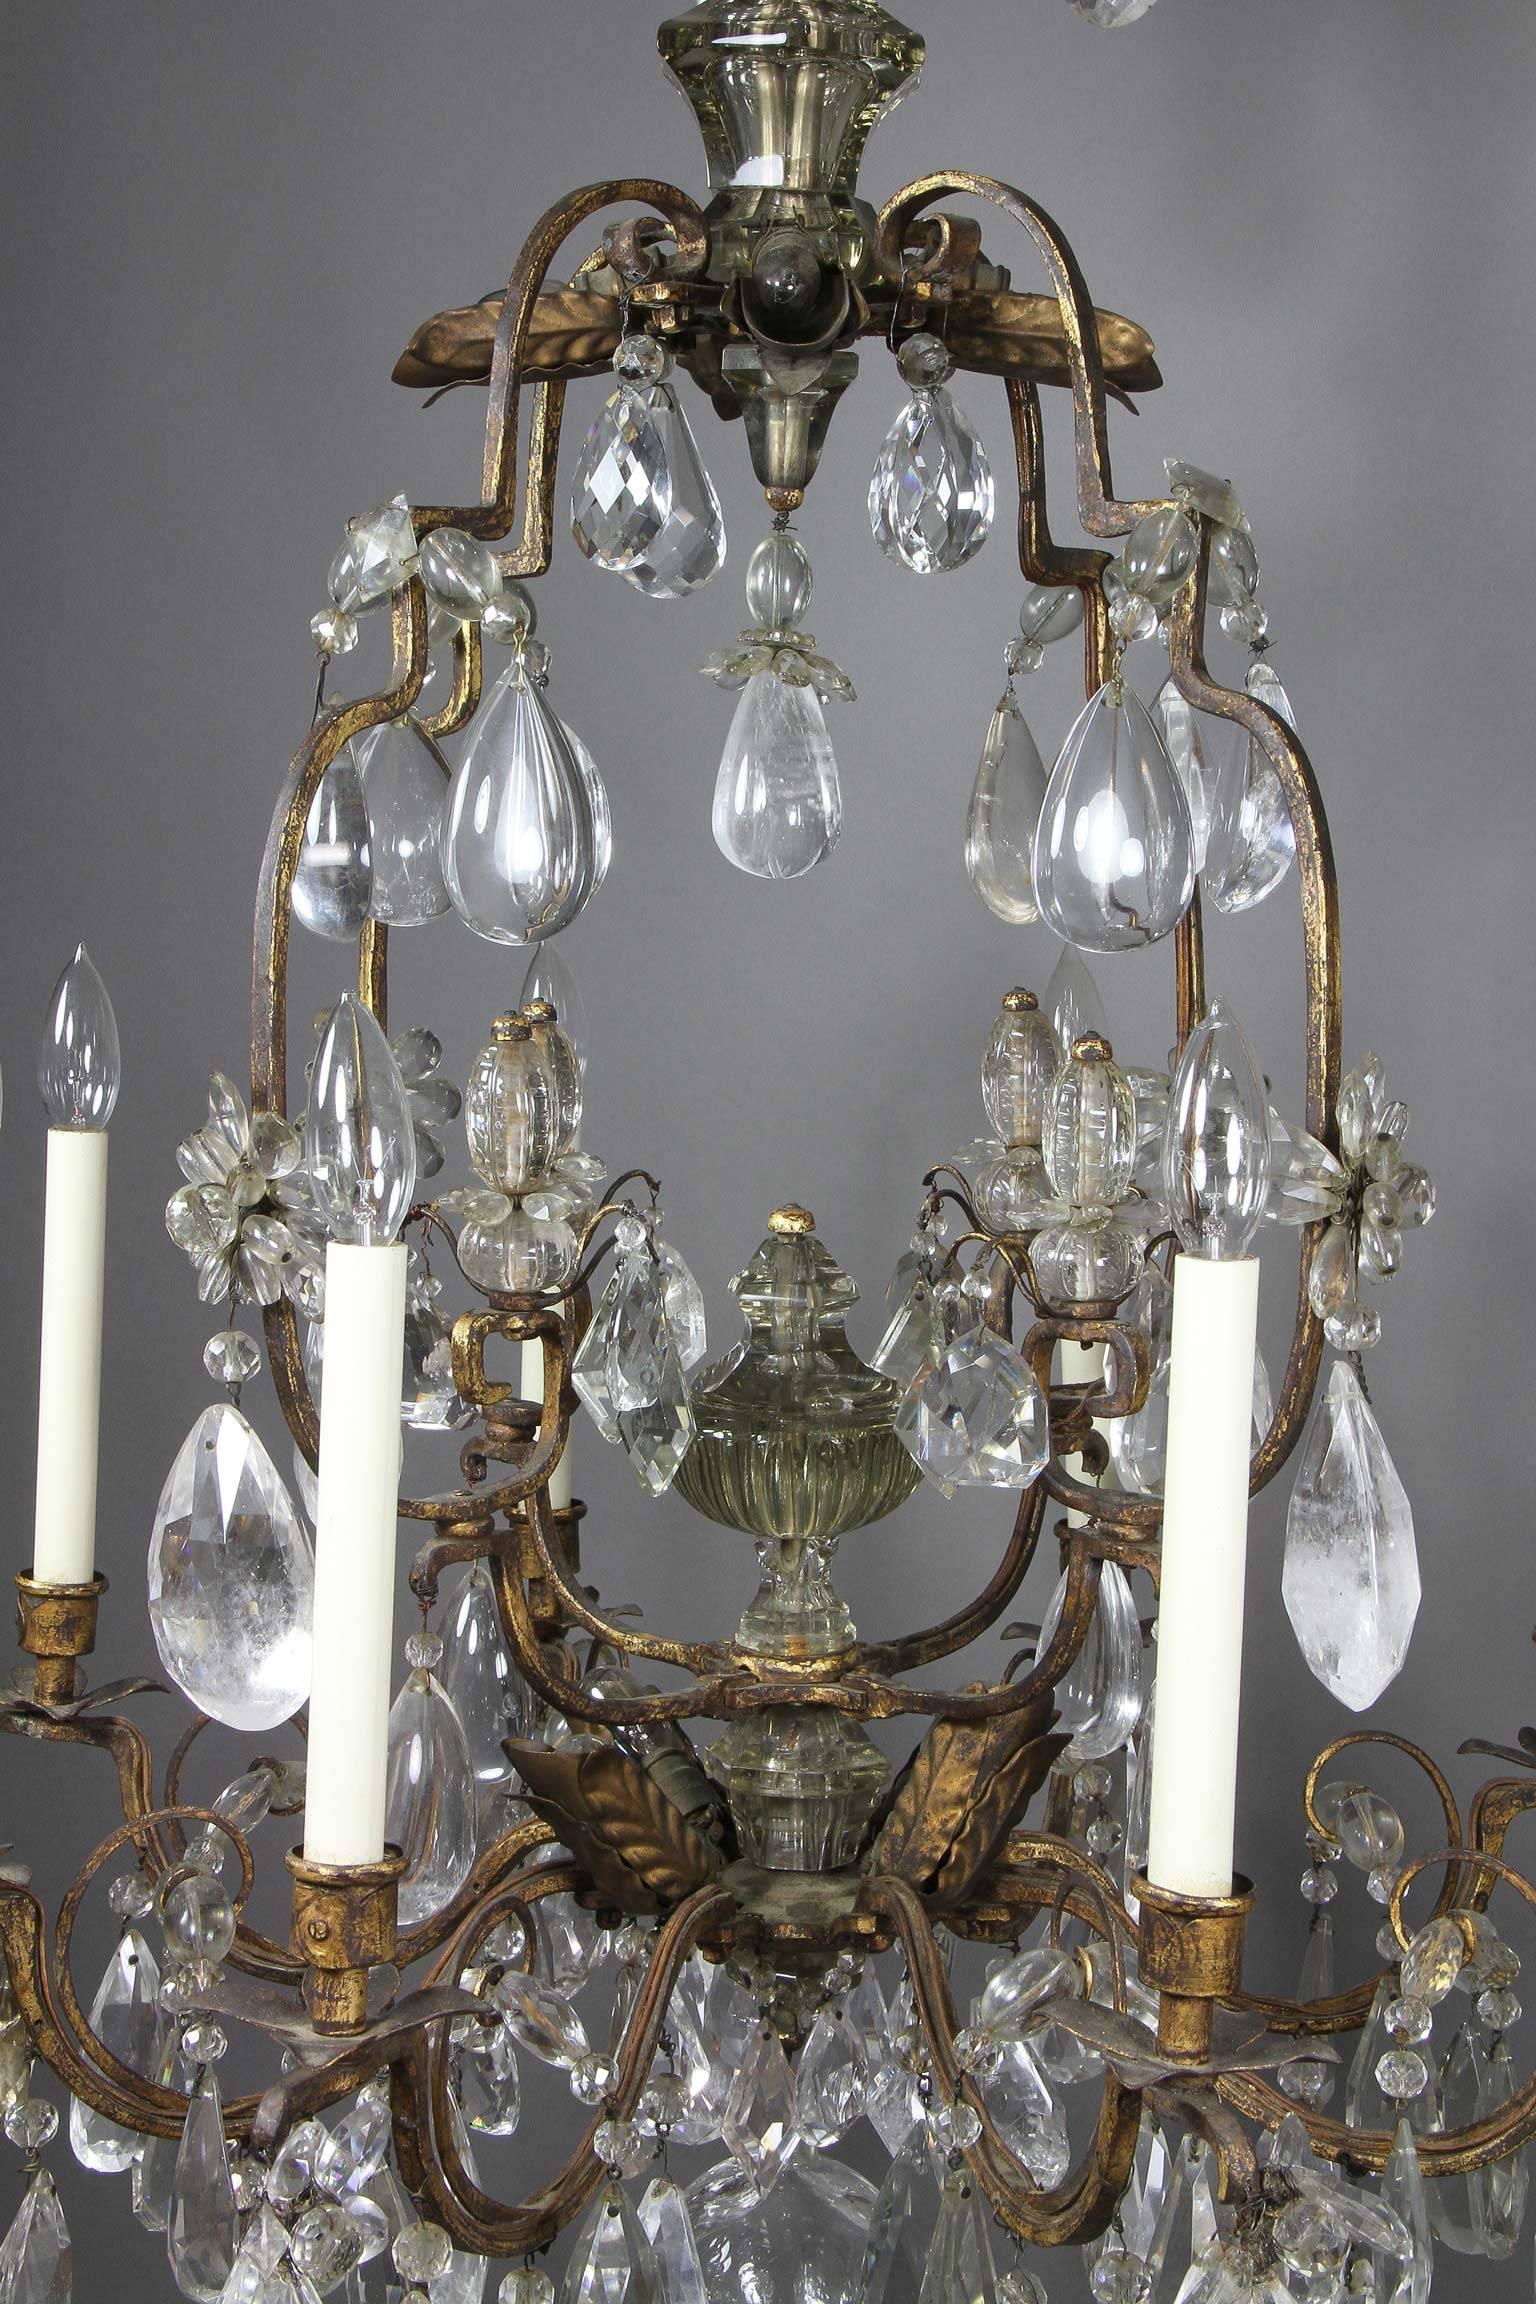 Typical form with four small arms with drops over a cage with drops overall and central urn over eight branches with lights. Very similar chandelier in the Legion Of Honor Art Museum in San Francisco. Gift of Consuelo Vanderbilt Balsan.